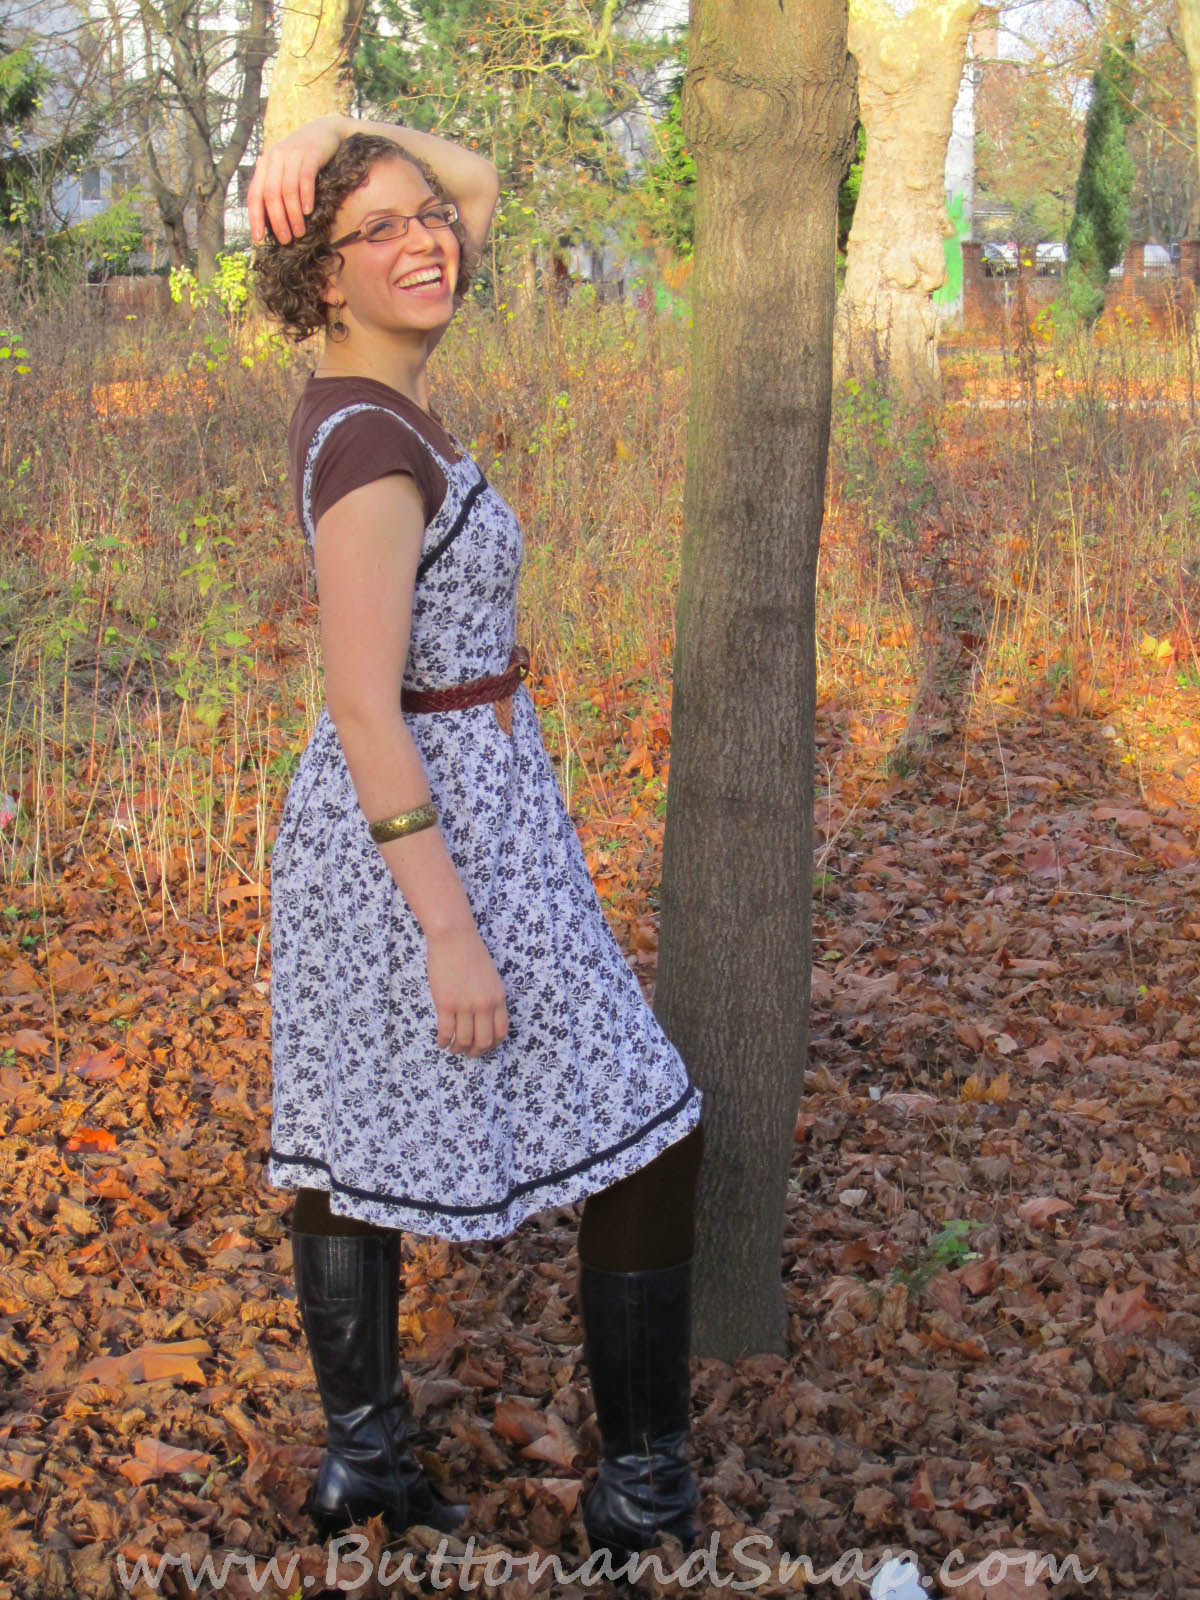 Styling a sundress to transition into fall